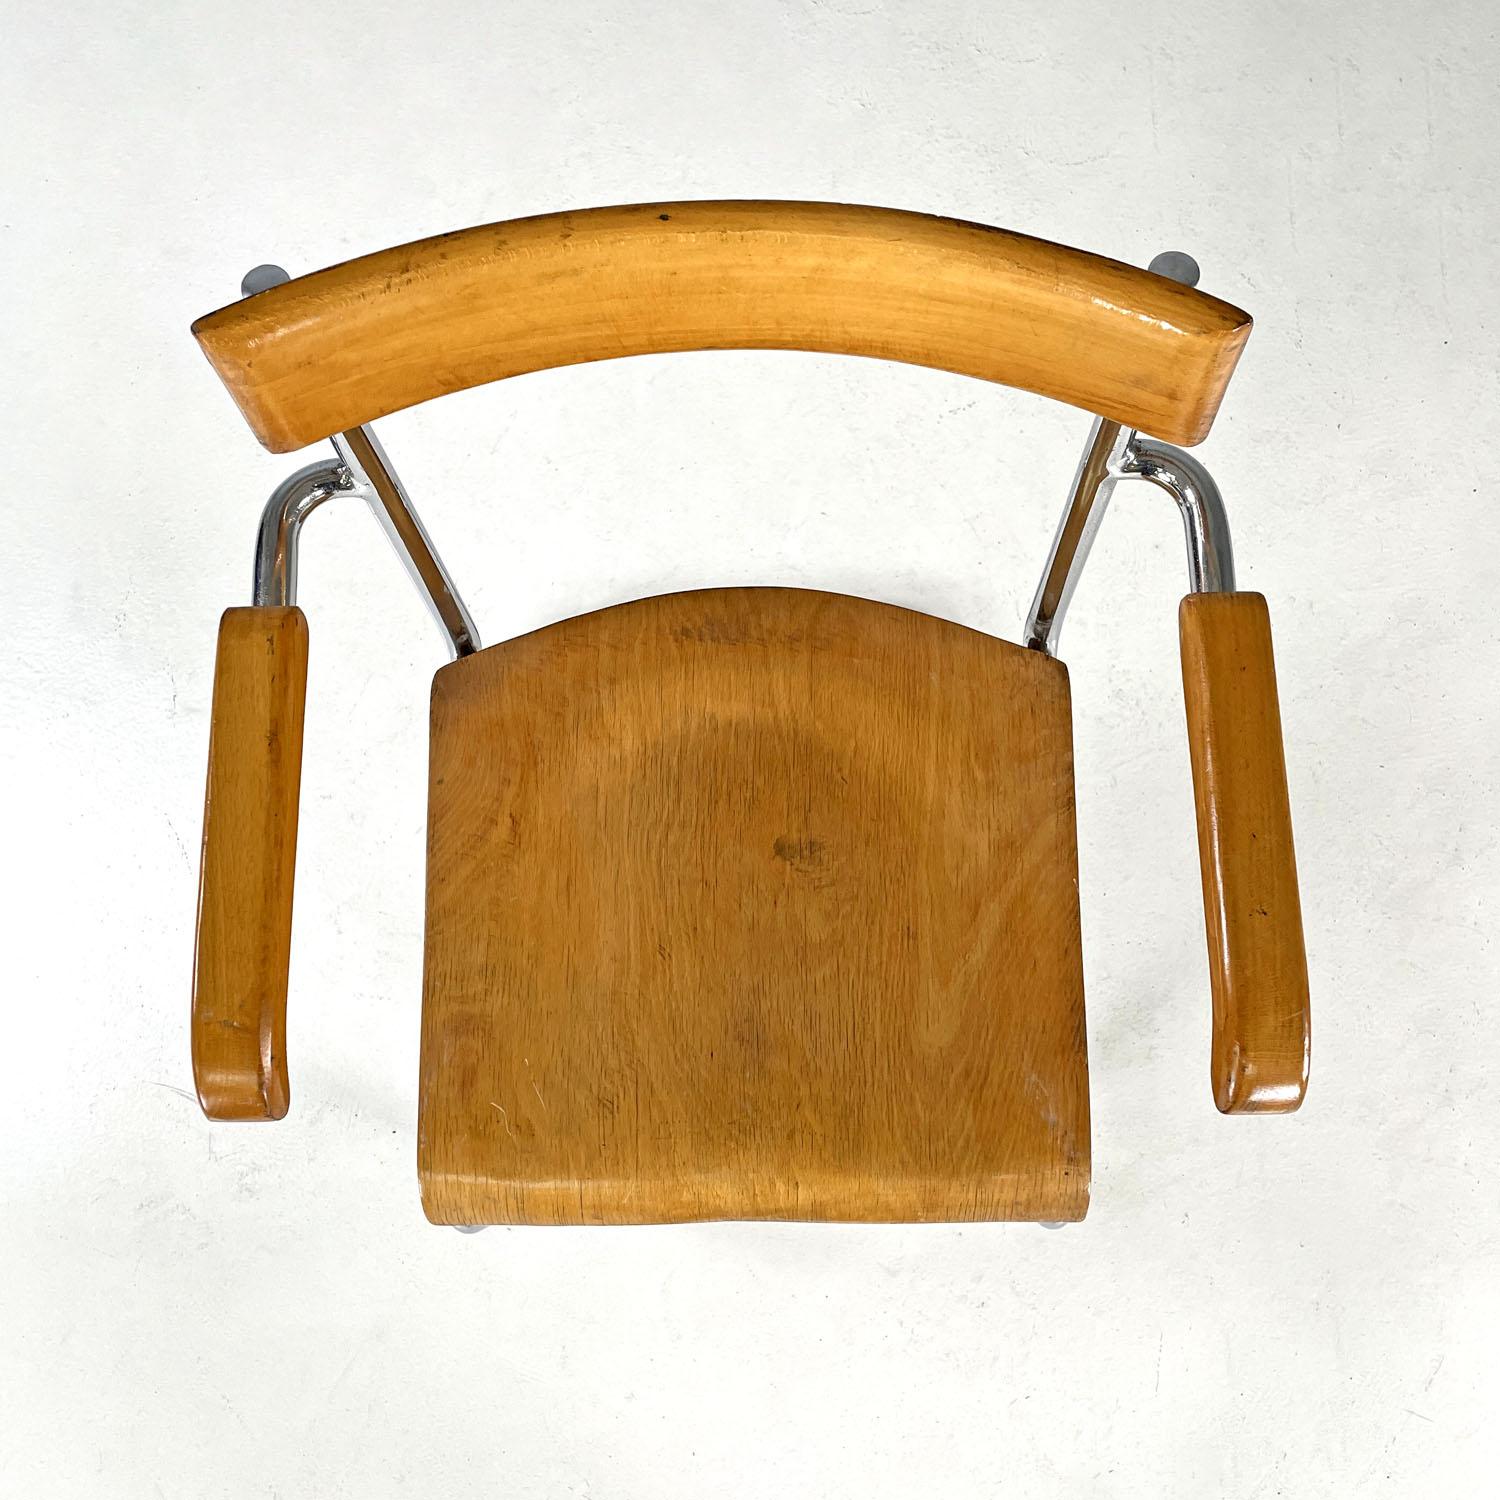 Czech Art Deco wood and chromed steel chair with armrests by Ladislav Zak, 1930s For Sale 1